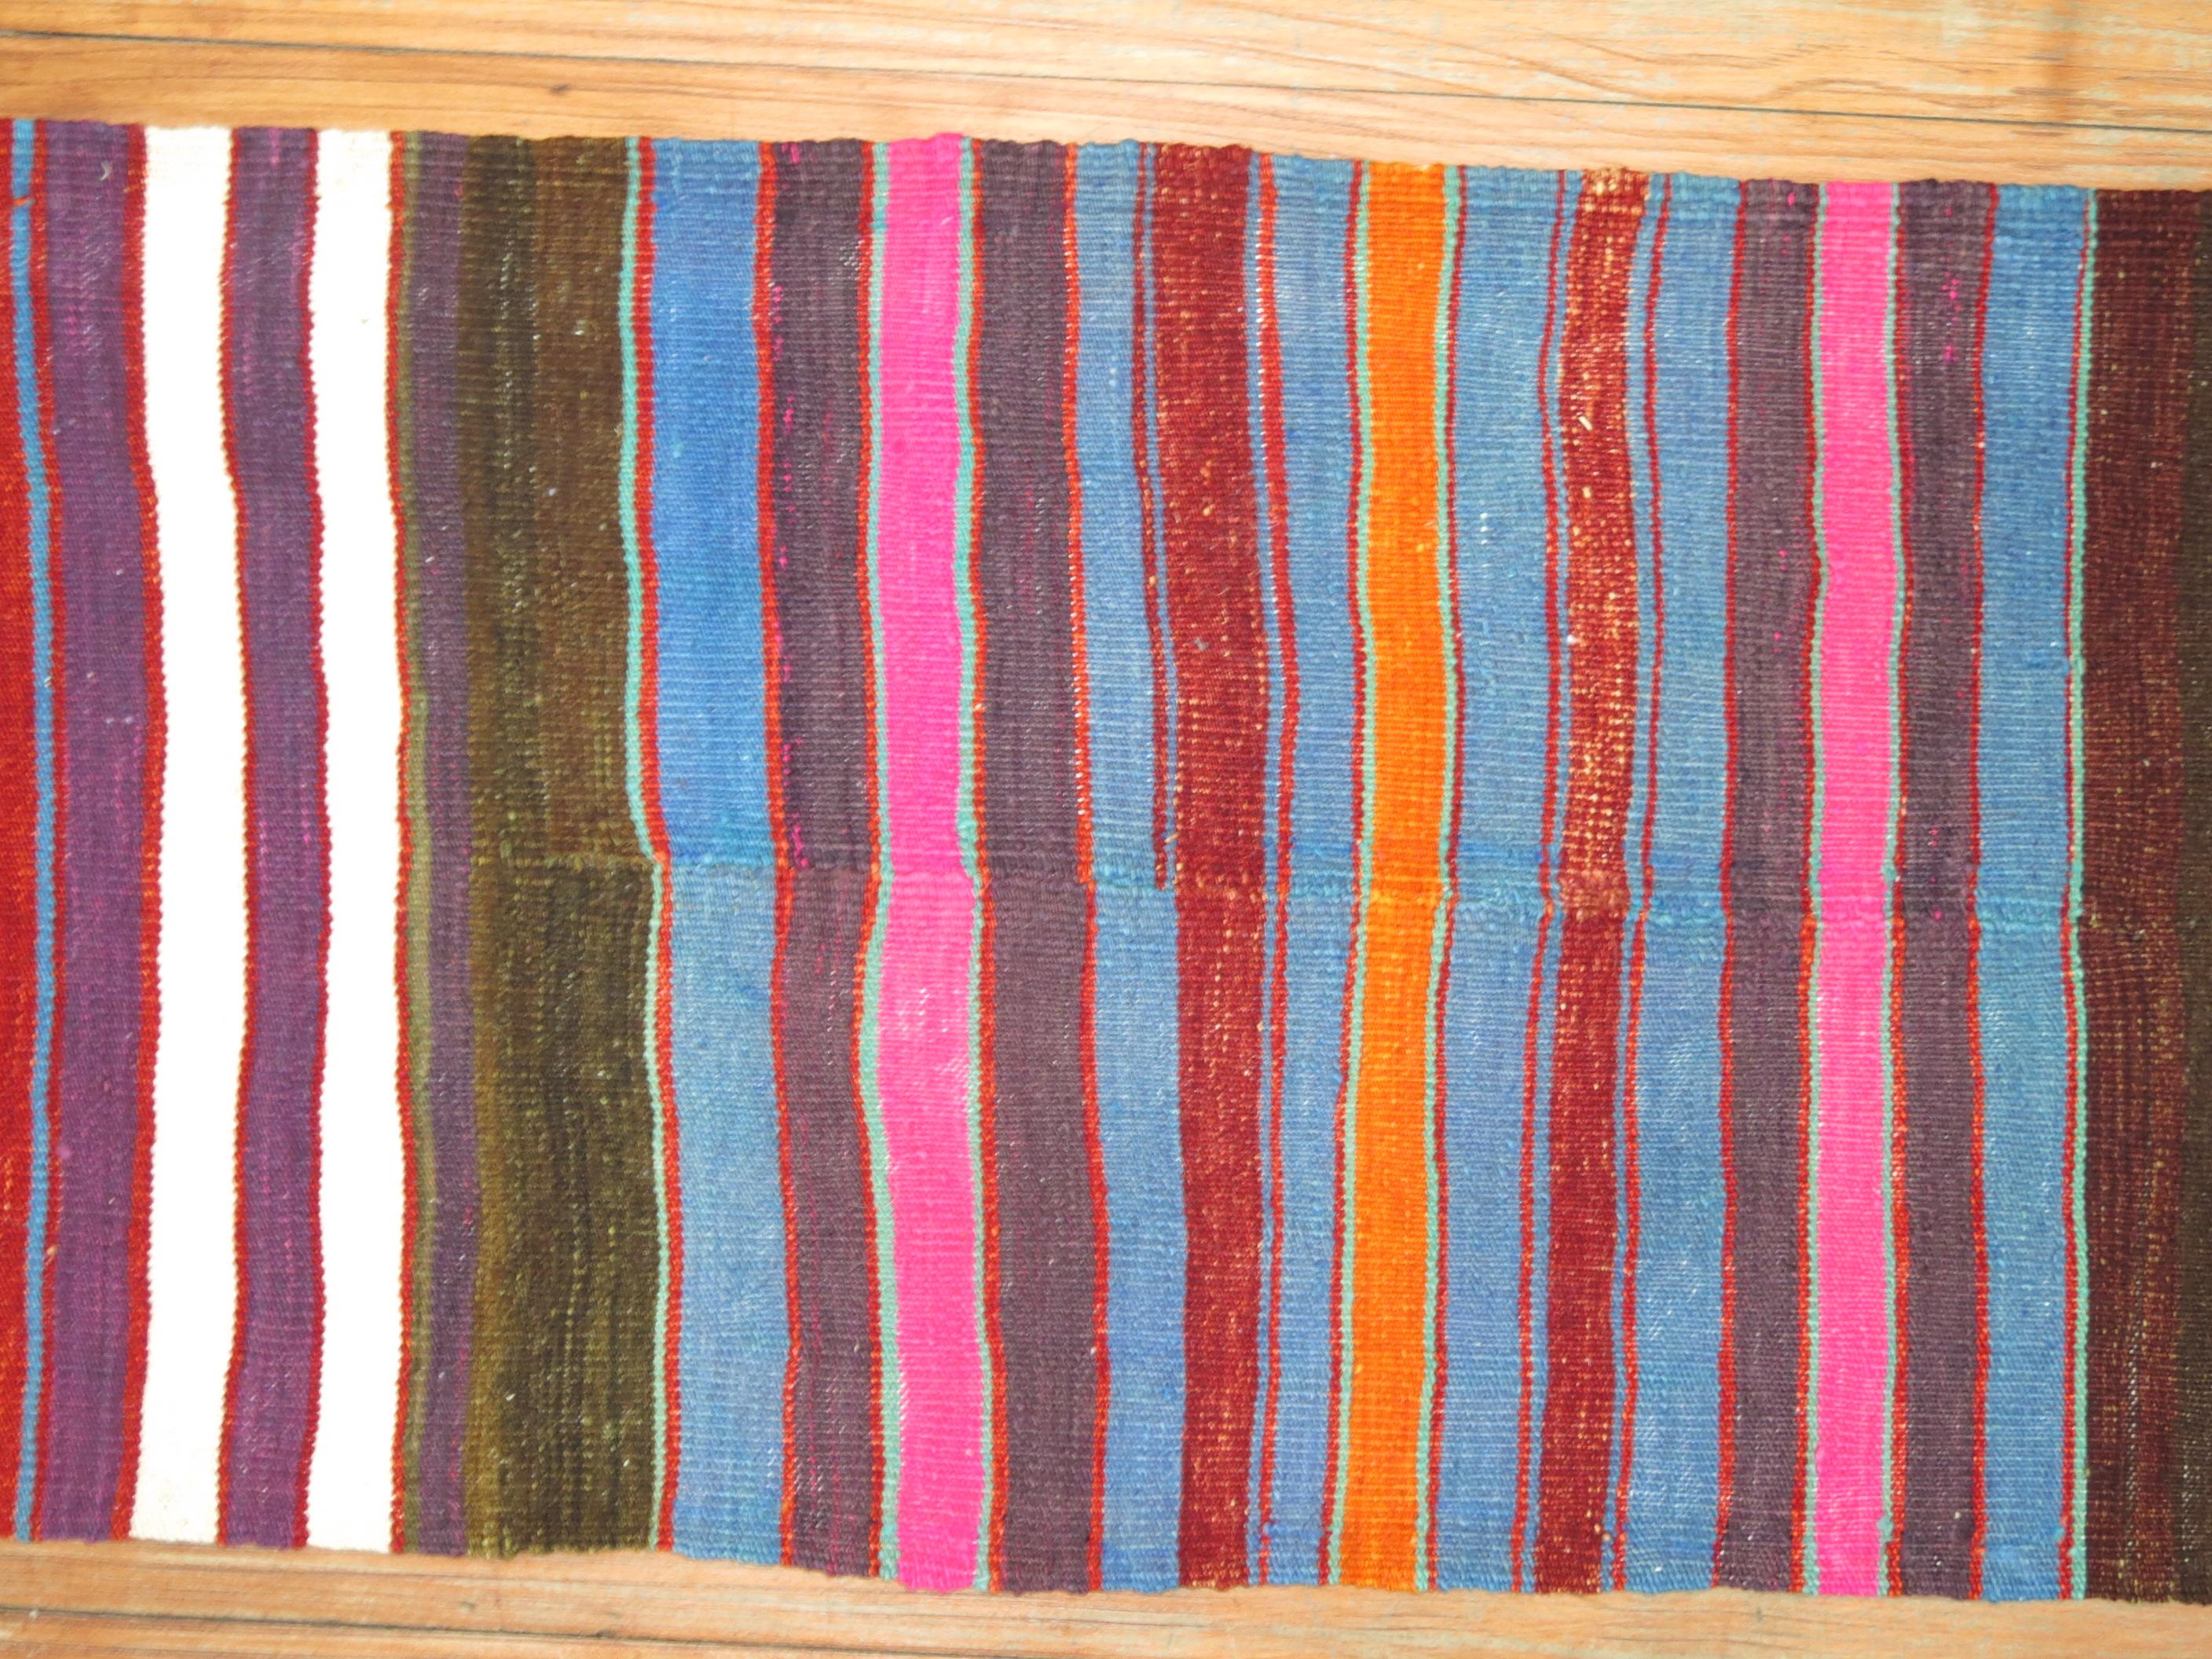 A one of a kind mid-20th century boho vibe Turkish Kilim runner.